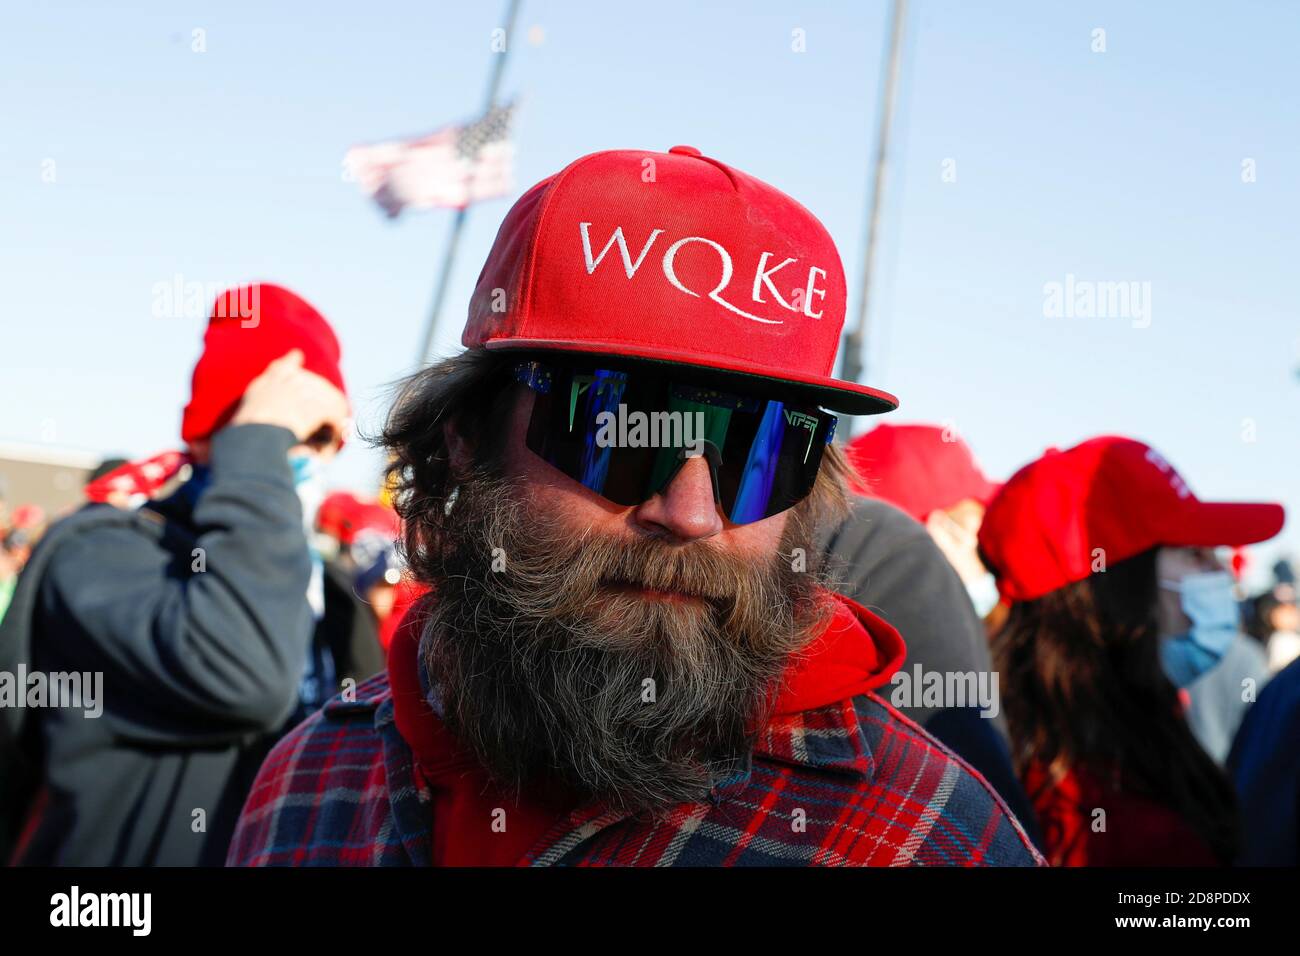 A man wearing a cap that references the QAnon slogan attends a U.S. President Donald Trump's campaign rally in Butler, Pennsylvania, U.S., October 31, 2020. REUTERS/Shannon Stapleton Stock Photo